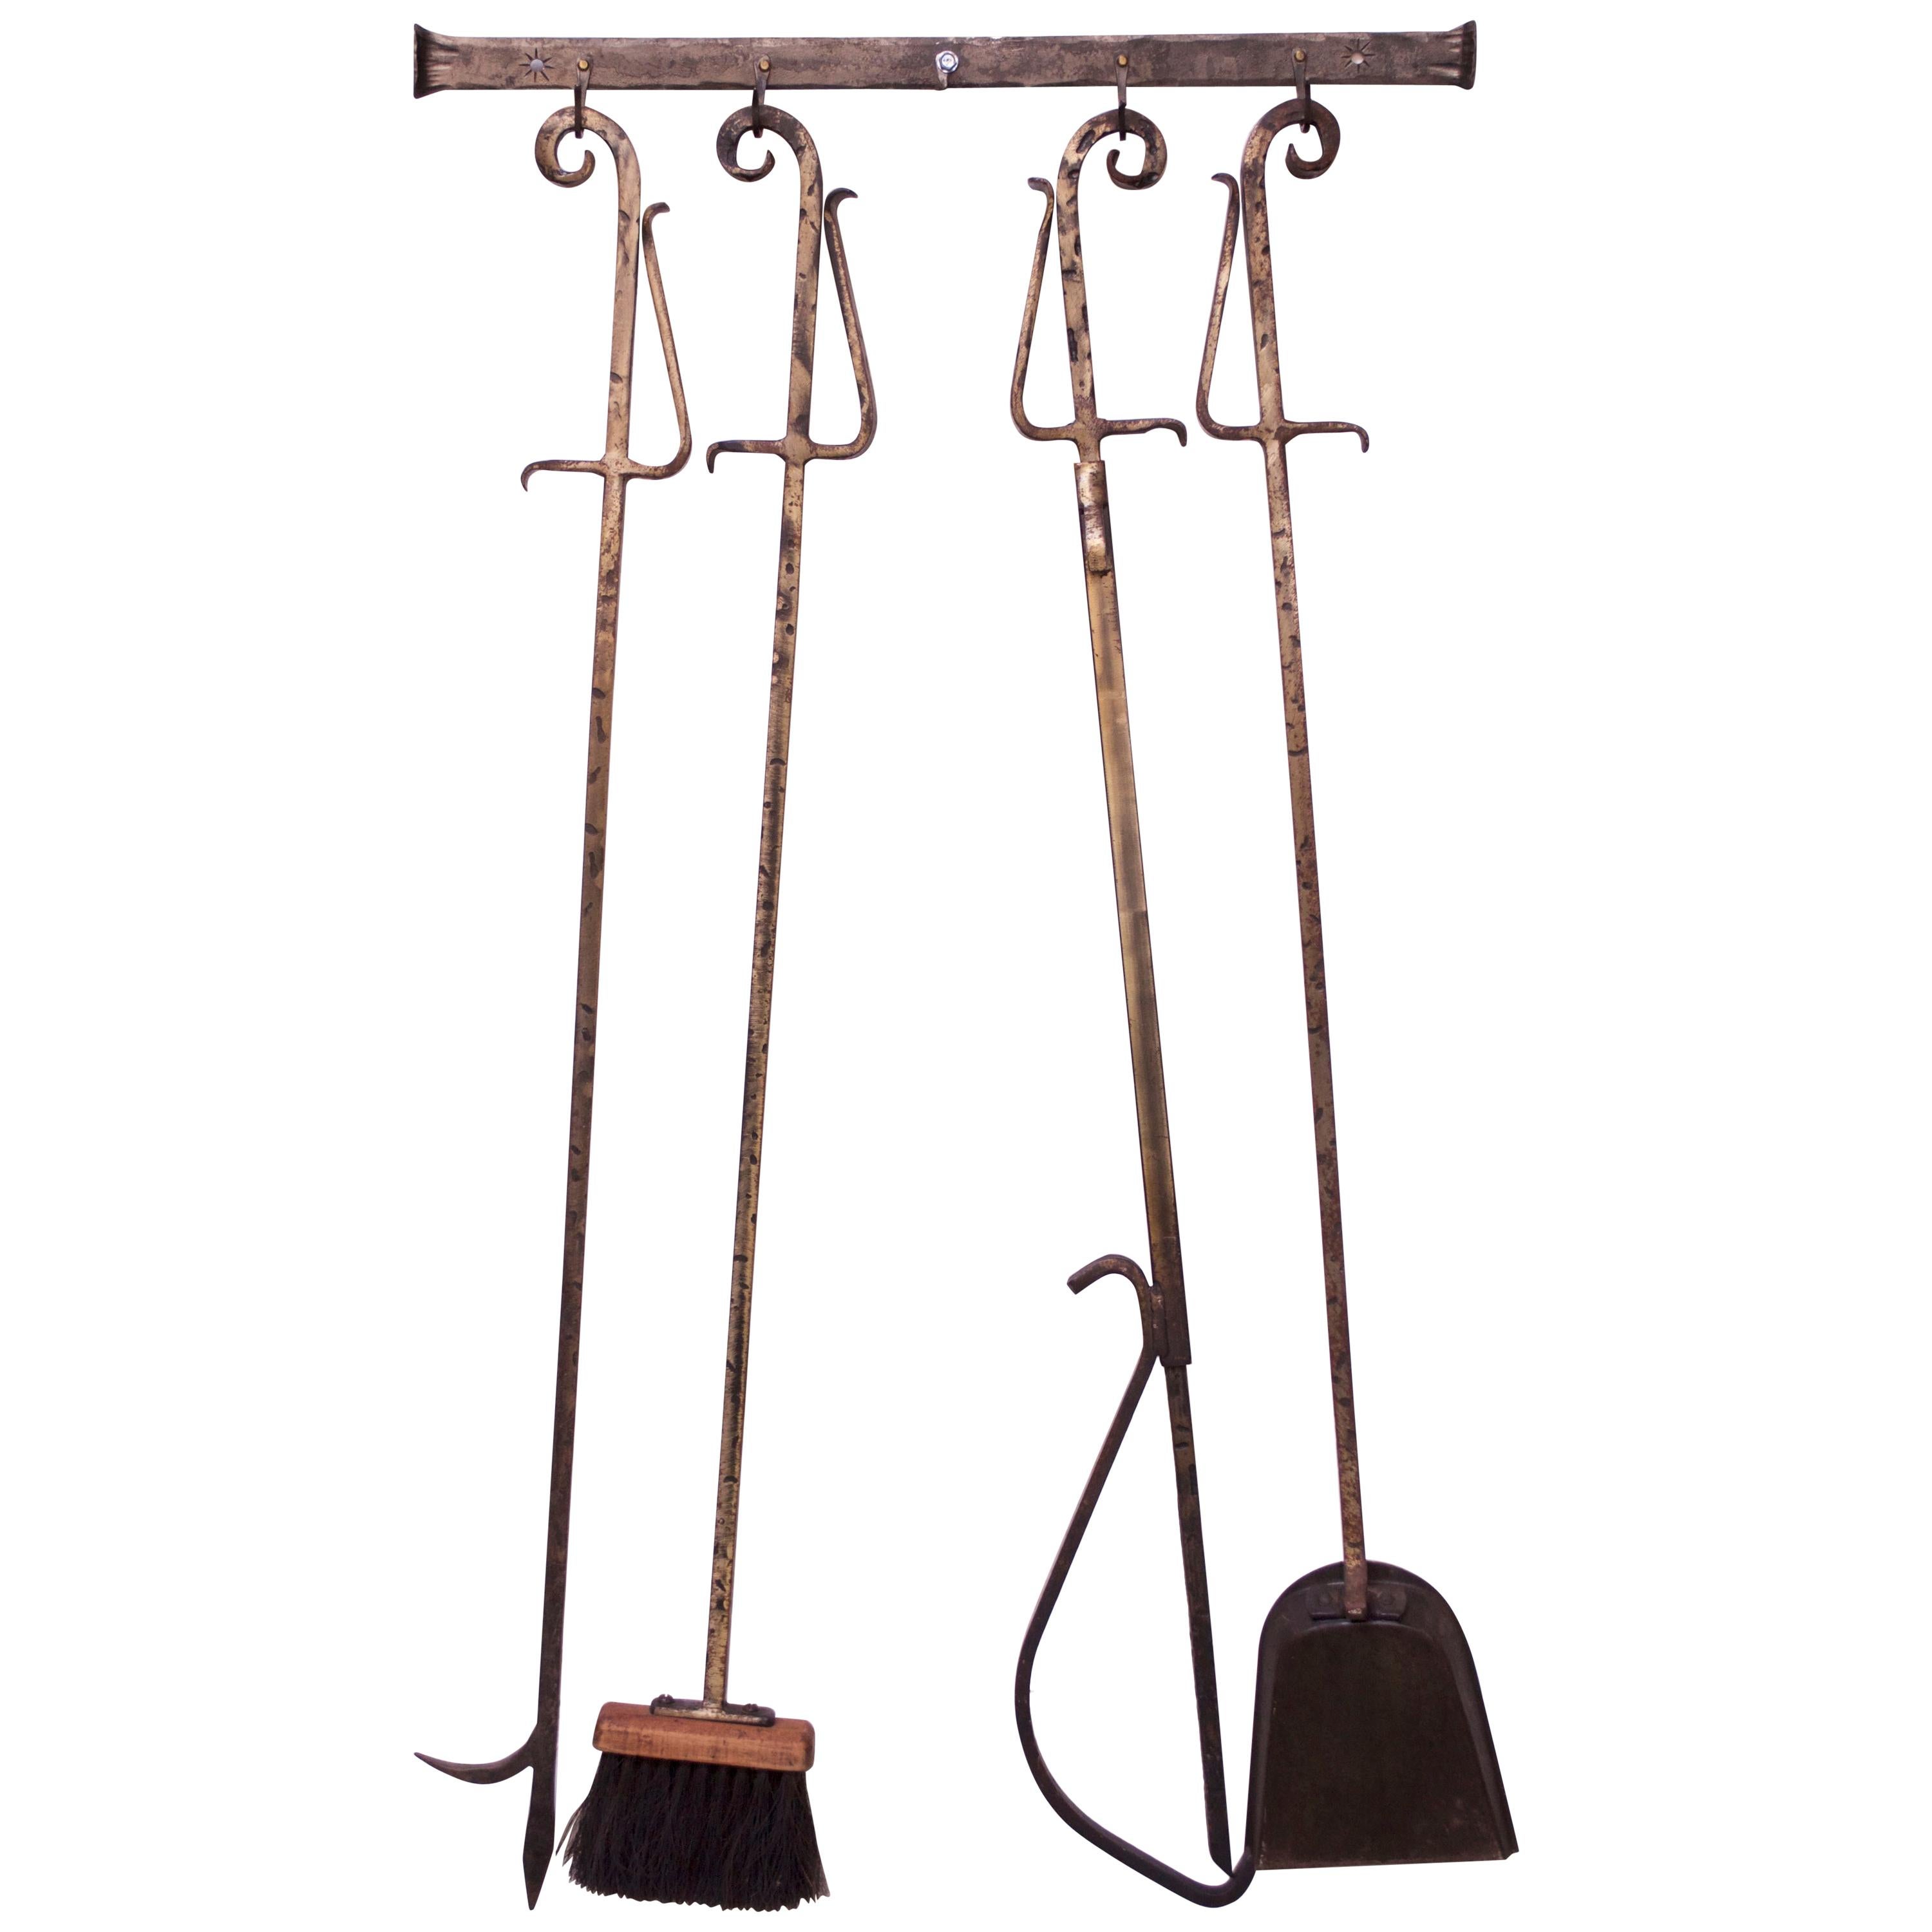 Brutalist-Style Hammered and Painted Iron Fire Tools with Wall-mounted Holder